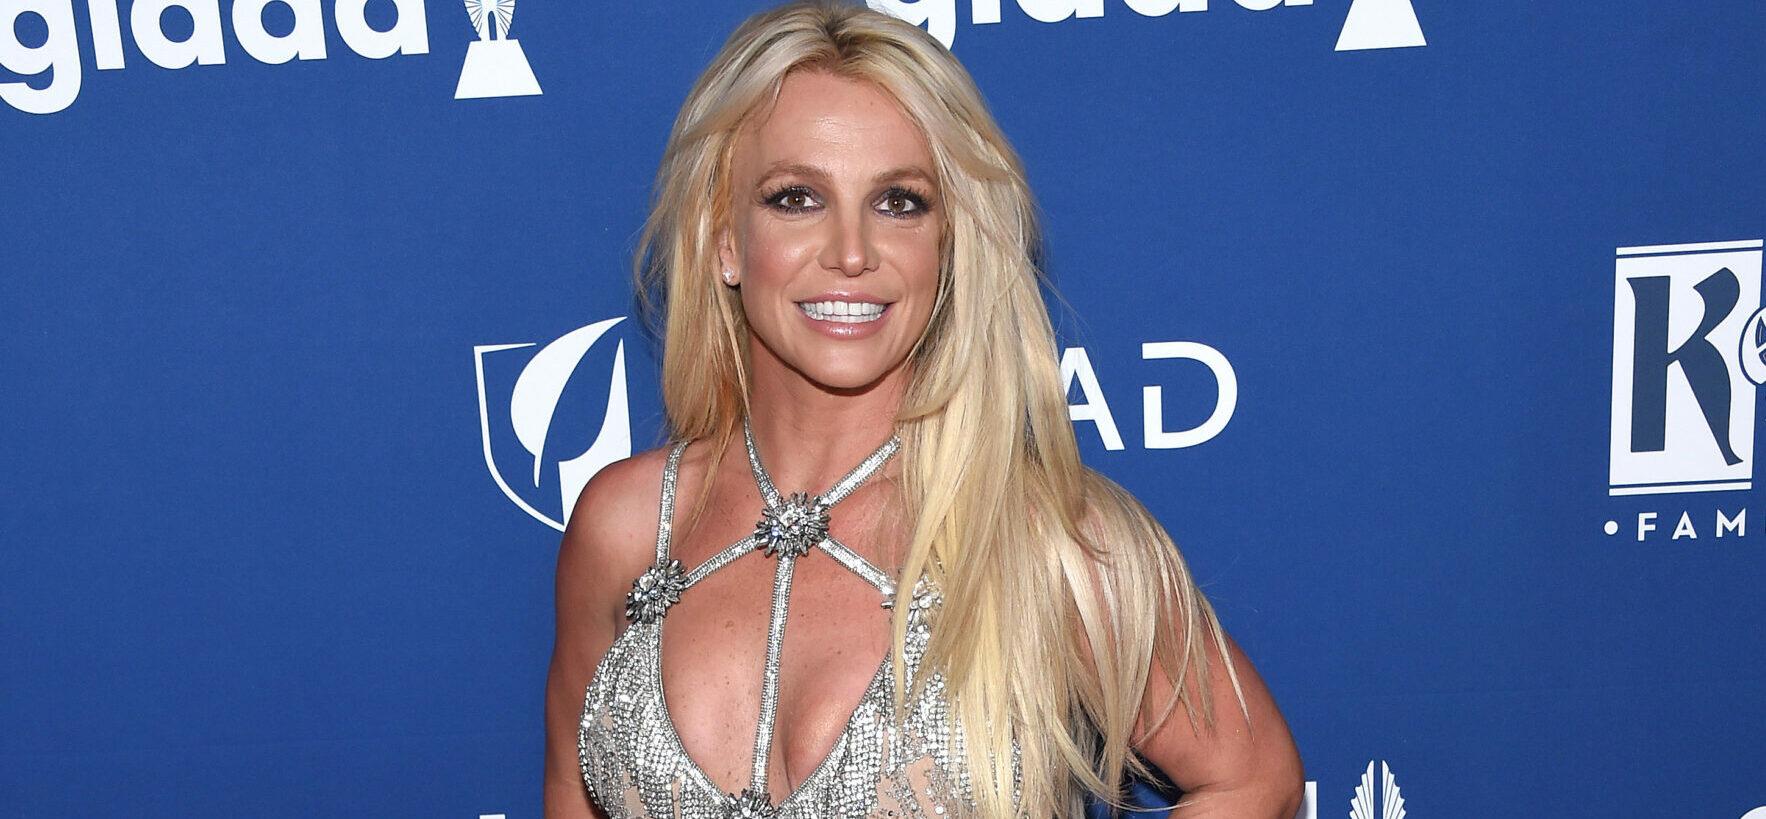 Britney Spears Shares Lacy Black See-Through Dress Throwback